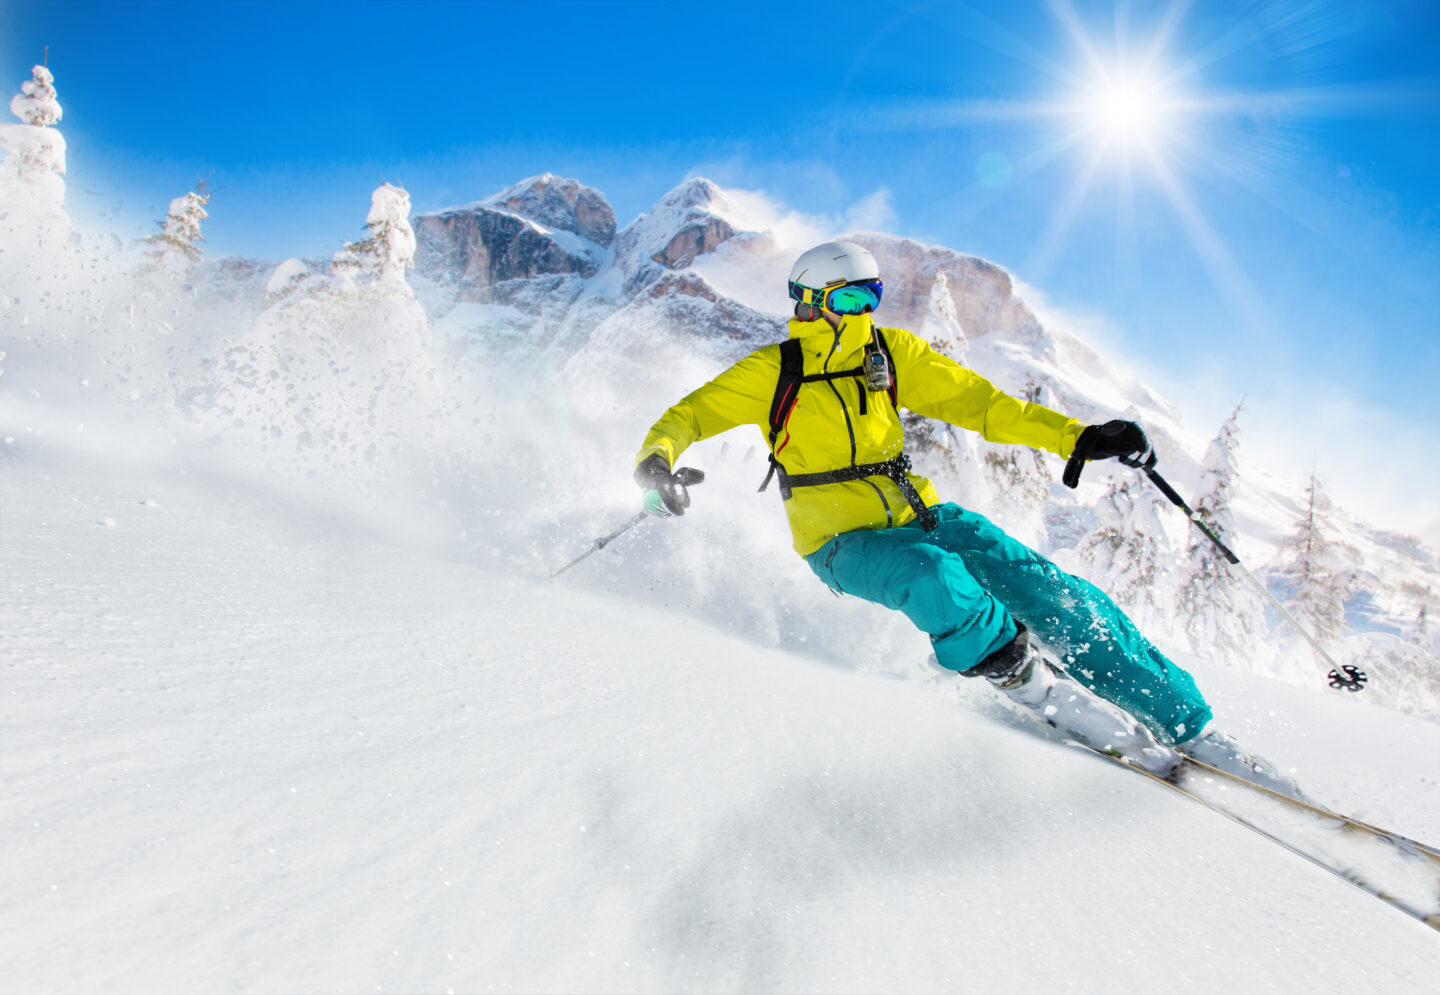 Learning To Ski As An Adult: Top 7 Skiing Tips For Beginners